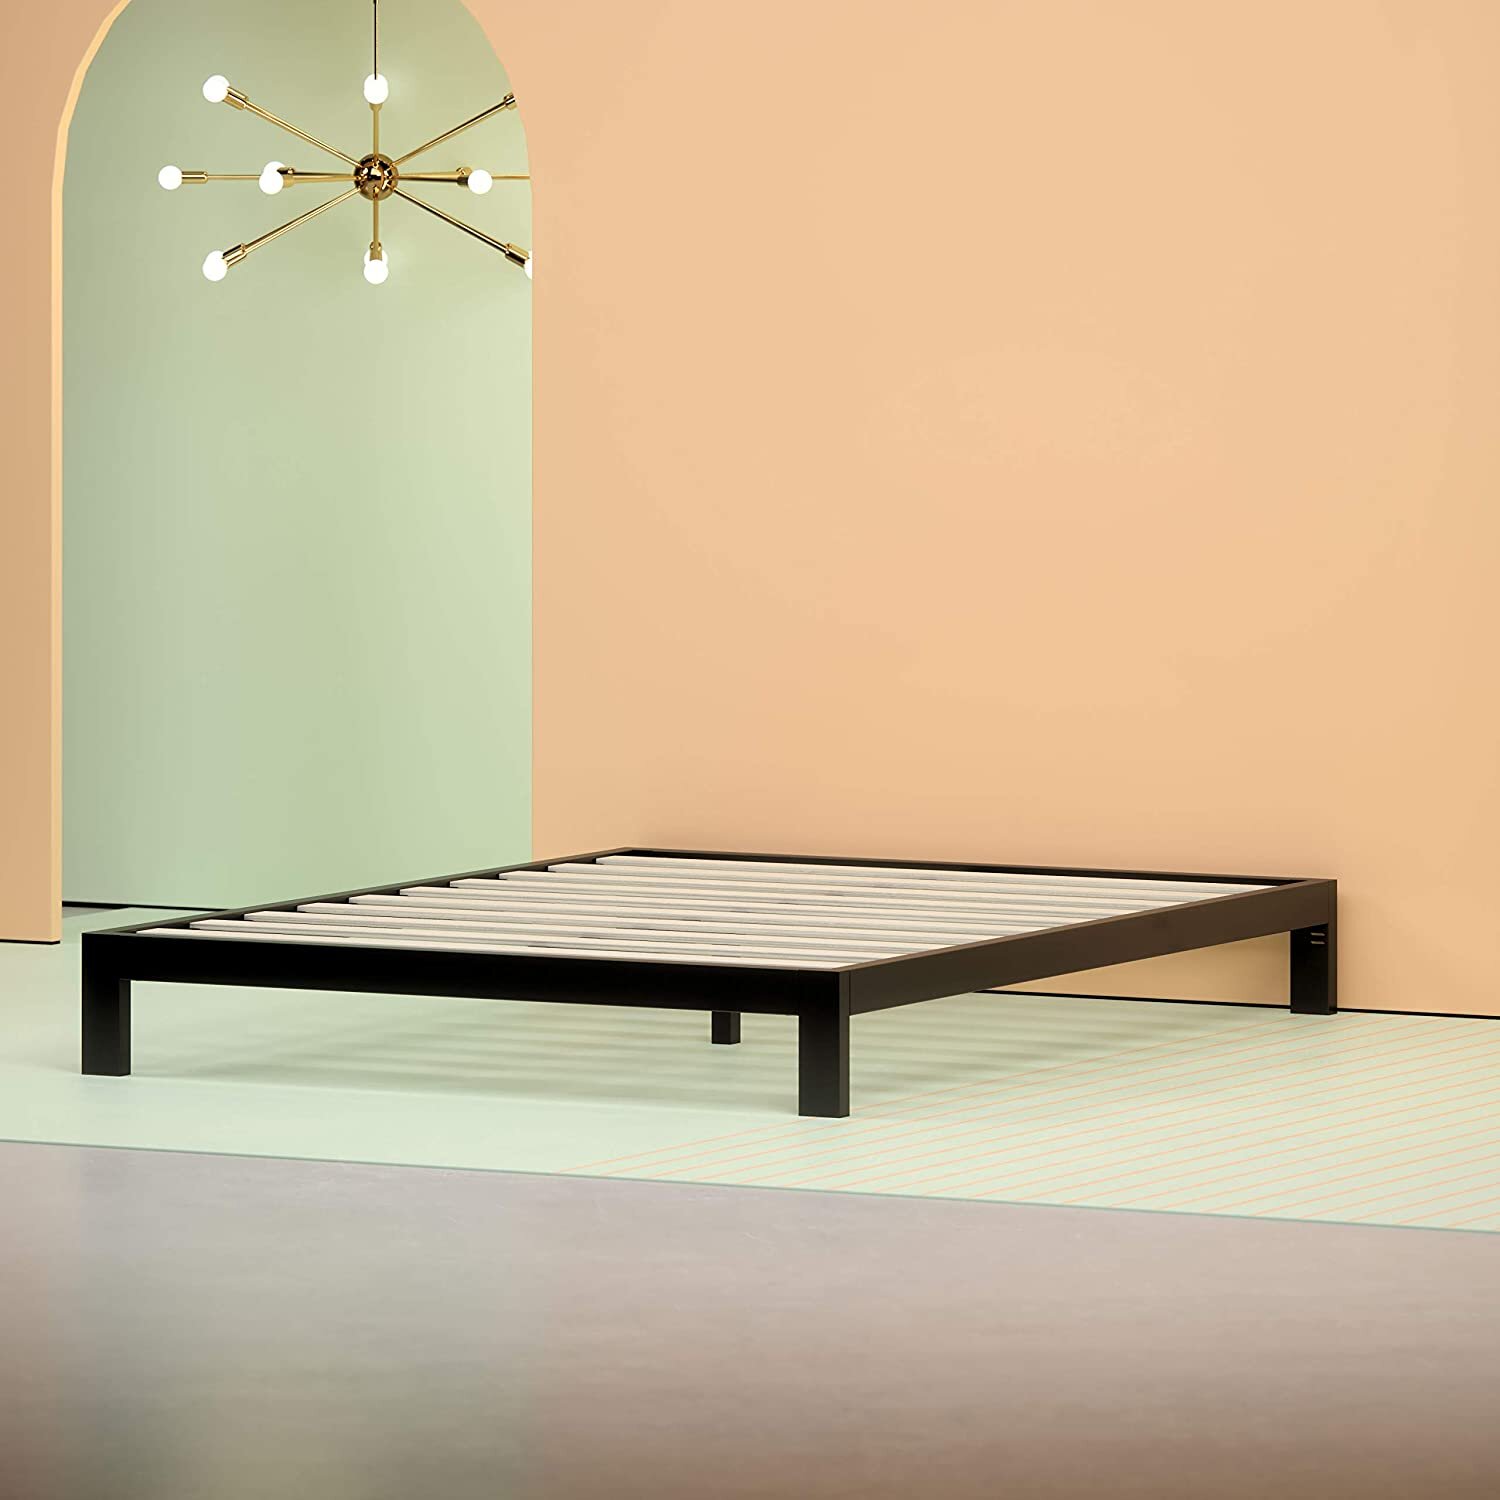 low single bed frame